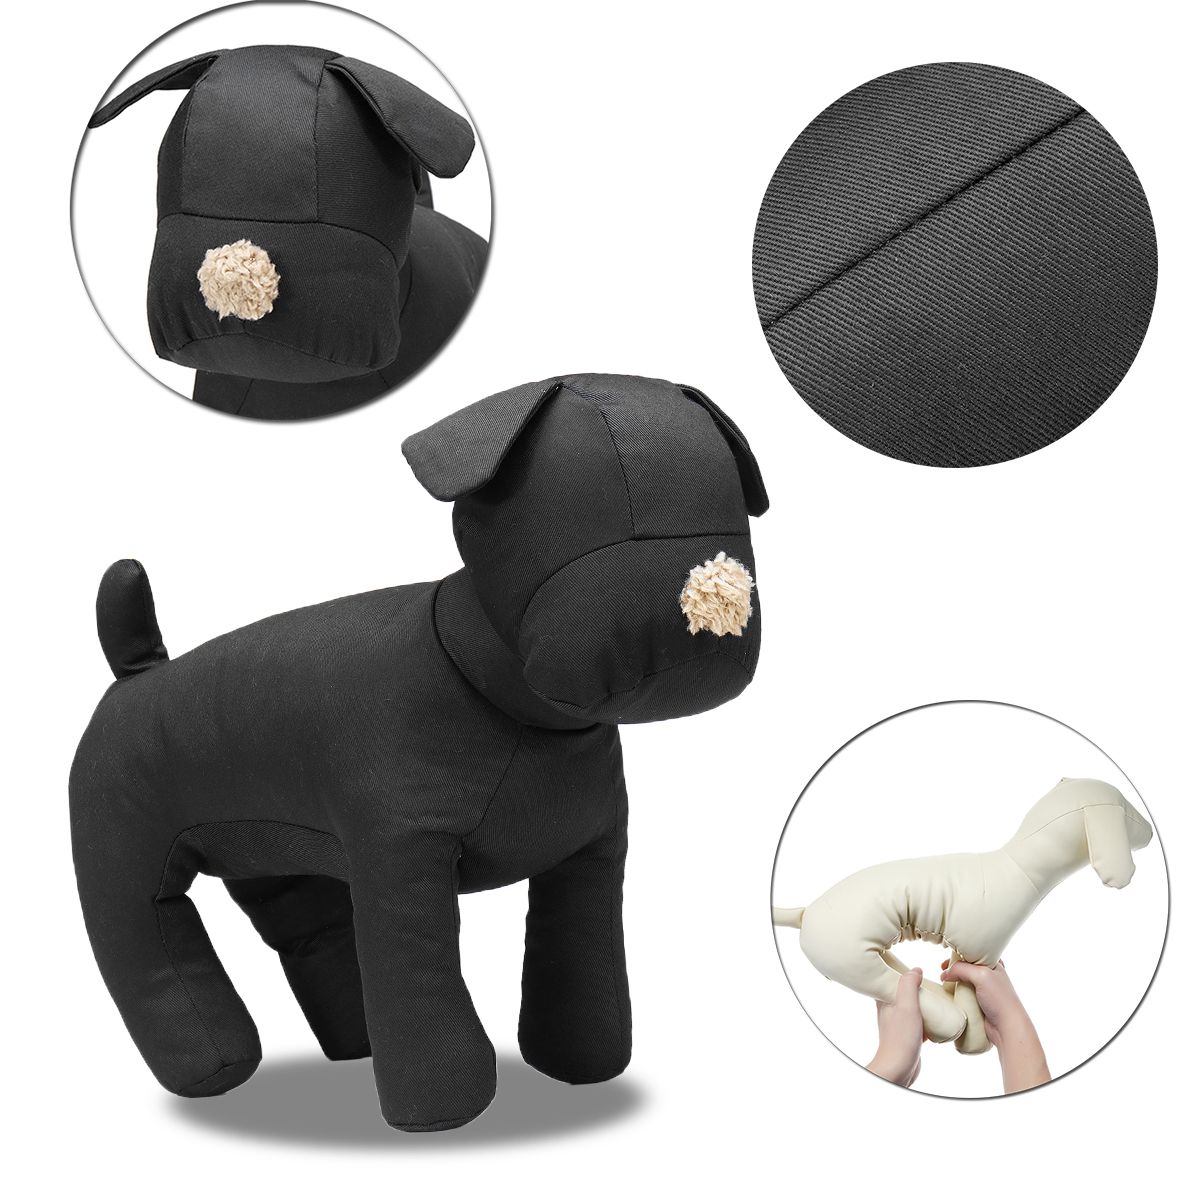 Cotton-Dog-Display-Model-Mannequin-for-Pet-Clothing-Apparel-Collar-Decorations-1557839